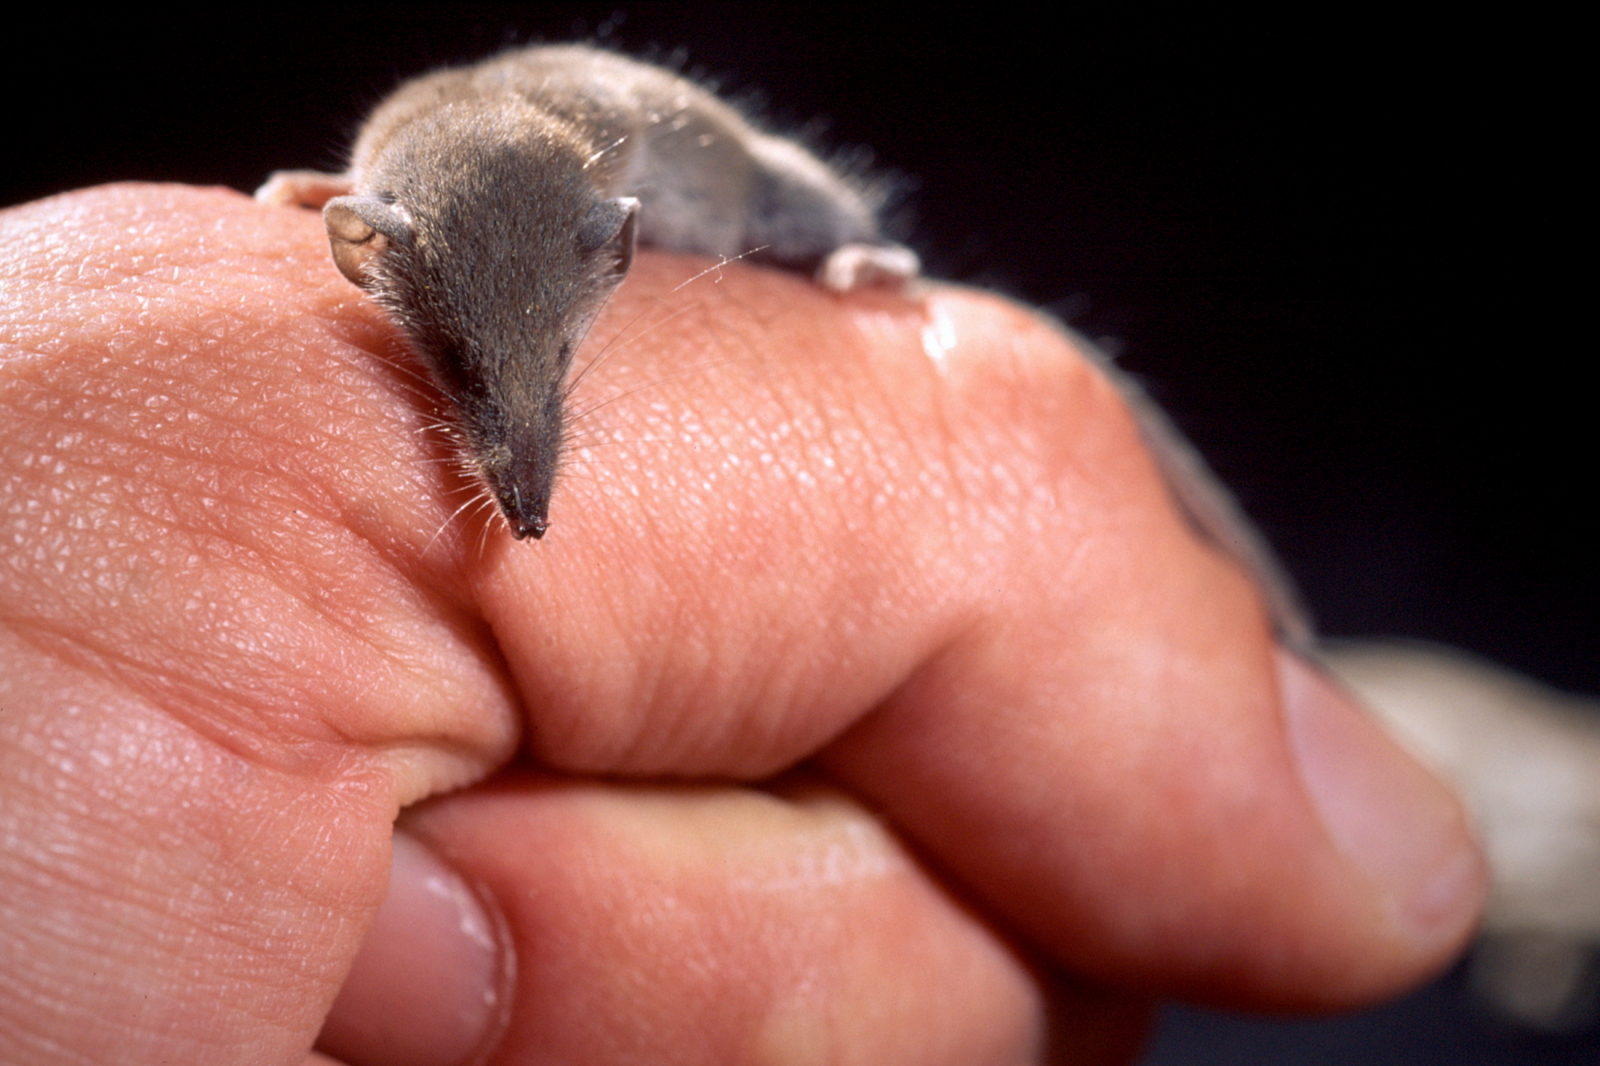 Is a pygmy shrew the smallest mammal in the world?